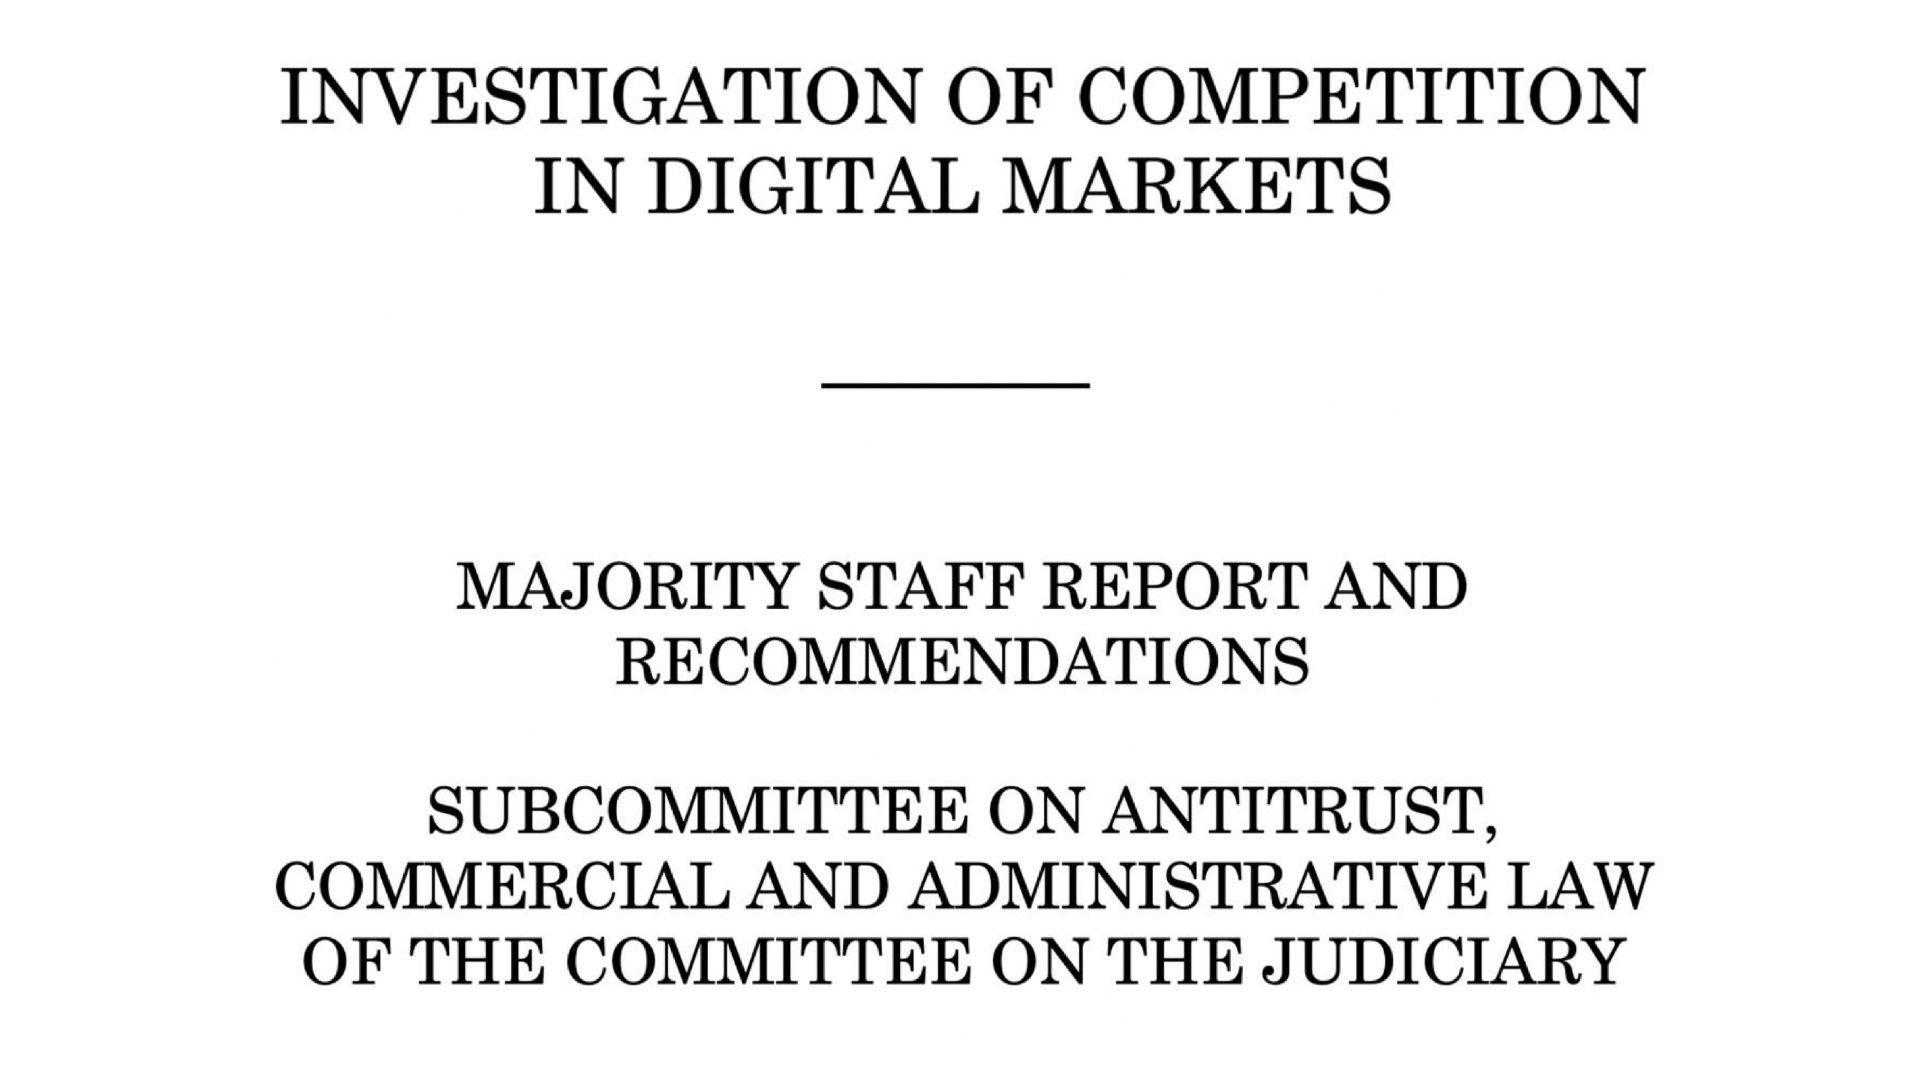 House report calls for antitrust law updates targeting Apple, Amazon, Google, and Facebook